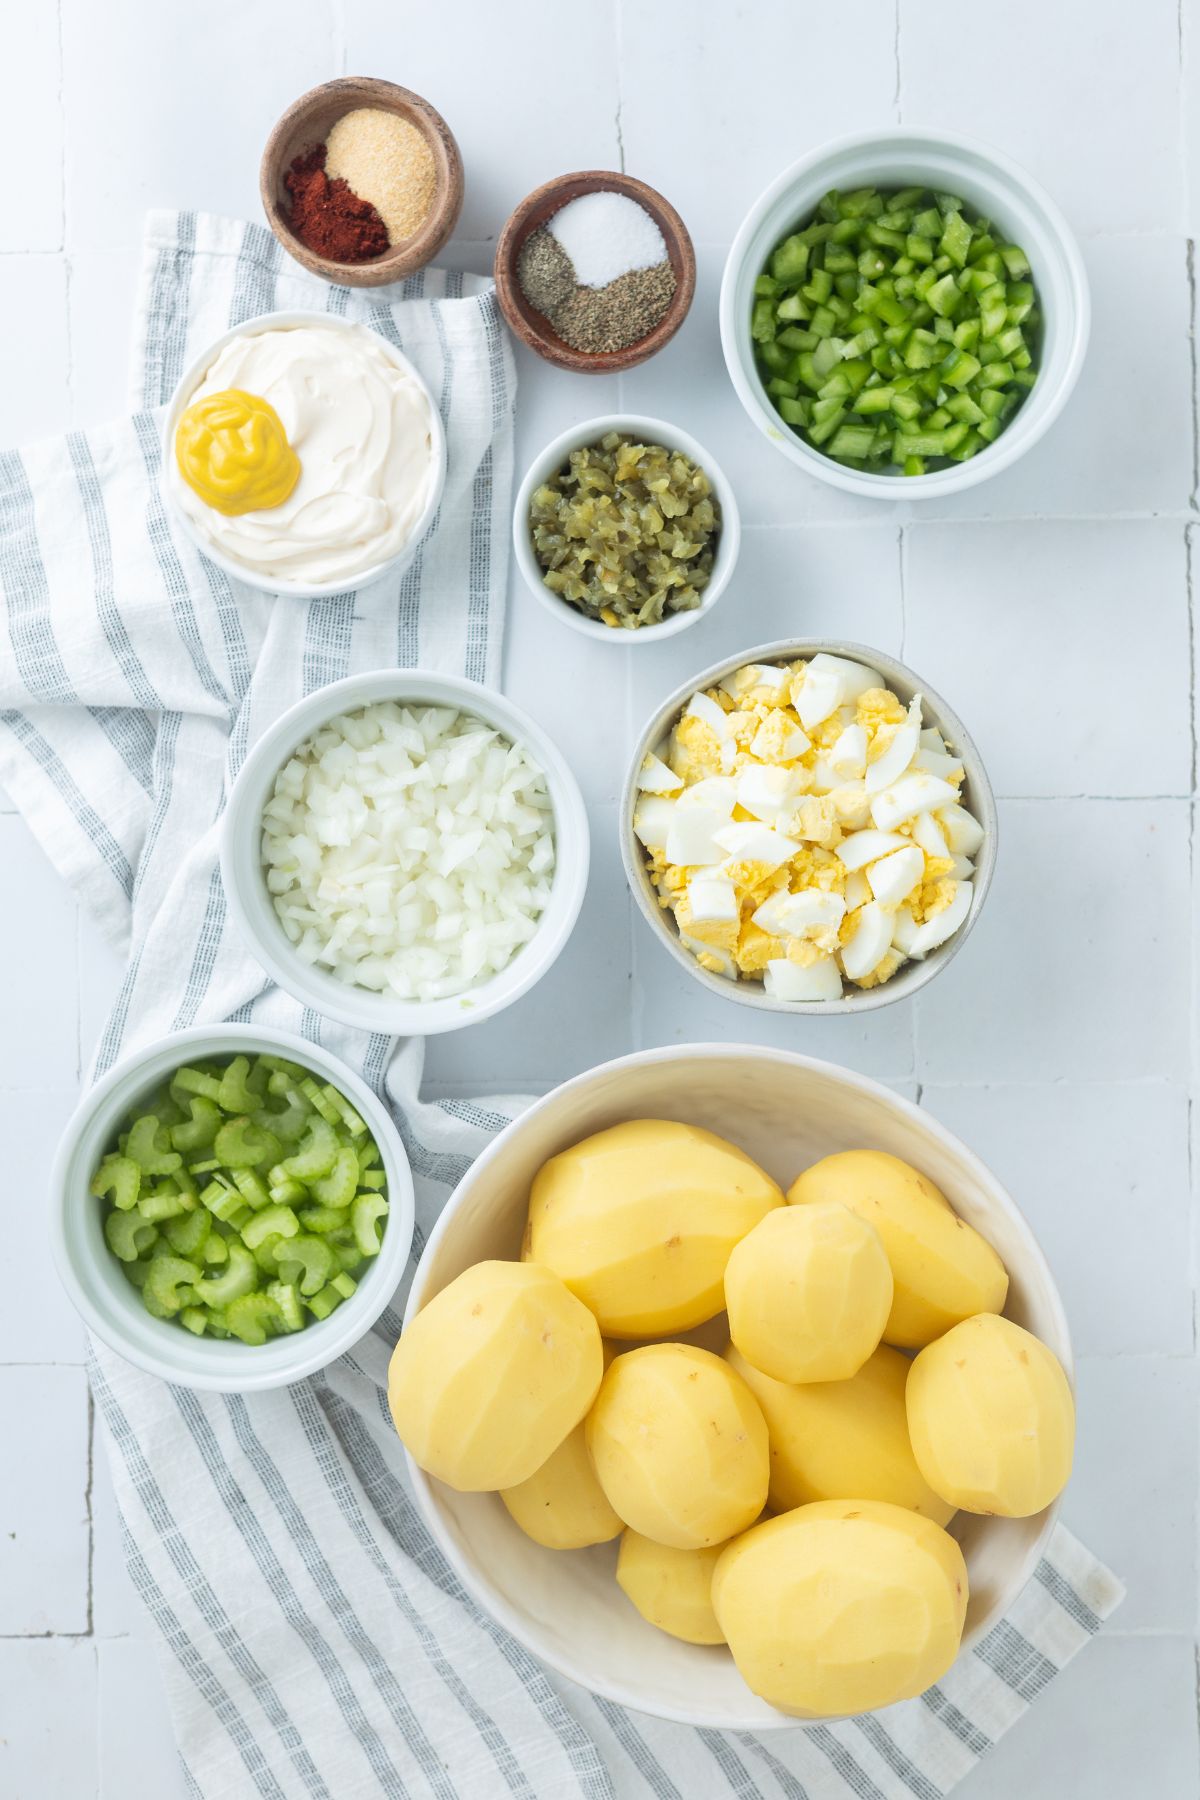 Separate bowls with ingredients for instant pot Potato Salad: Yukon Gold Potatoes, large eggs, yellow onion, green bell pepper, celery, celery seed, mayonnaise, yellow mustard, sweet relish, sea salt, black pepper, smoked paprika, and garlic powder.